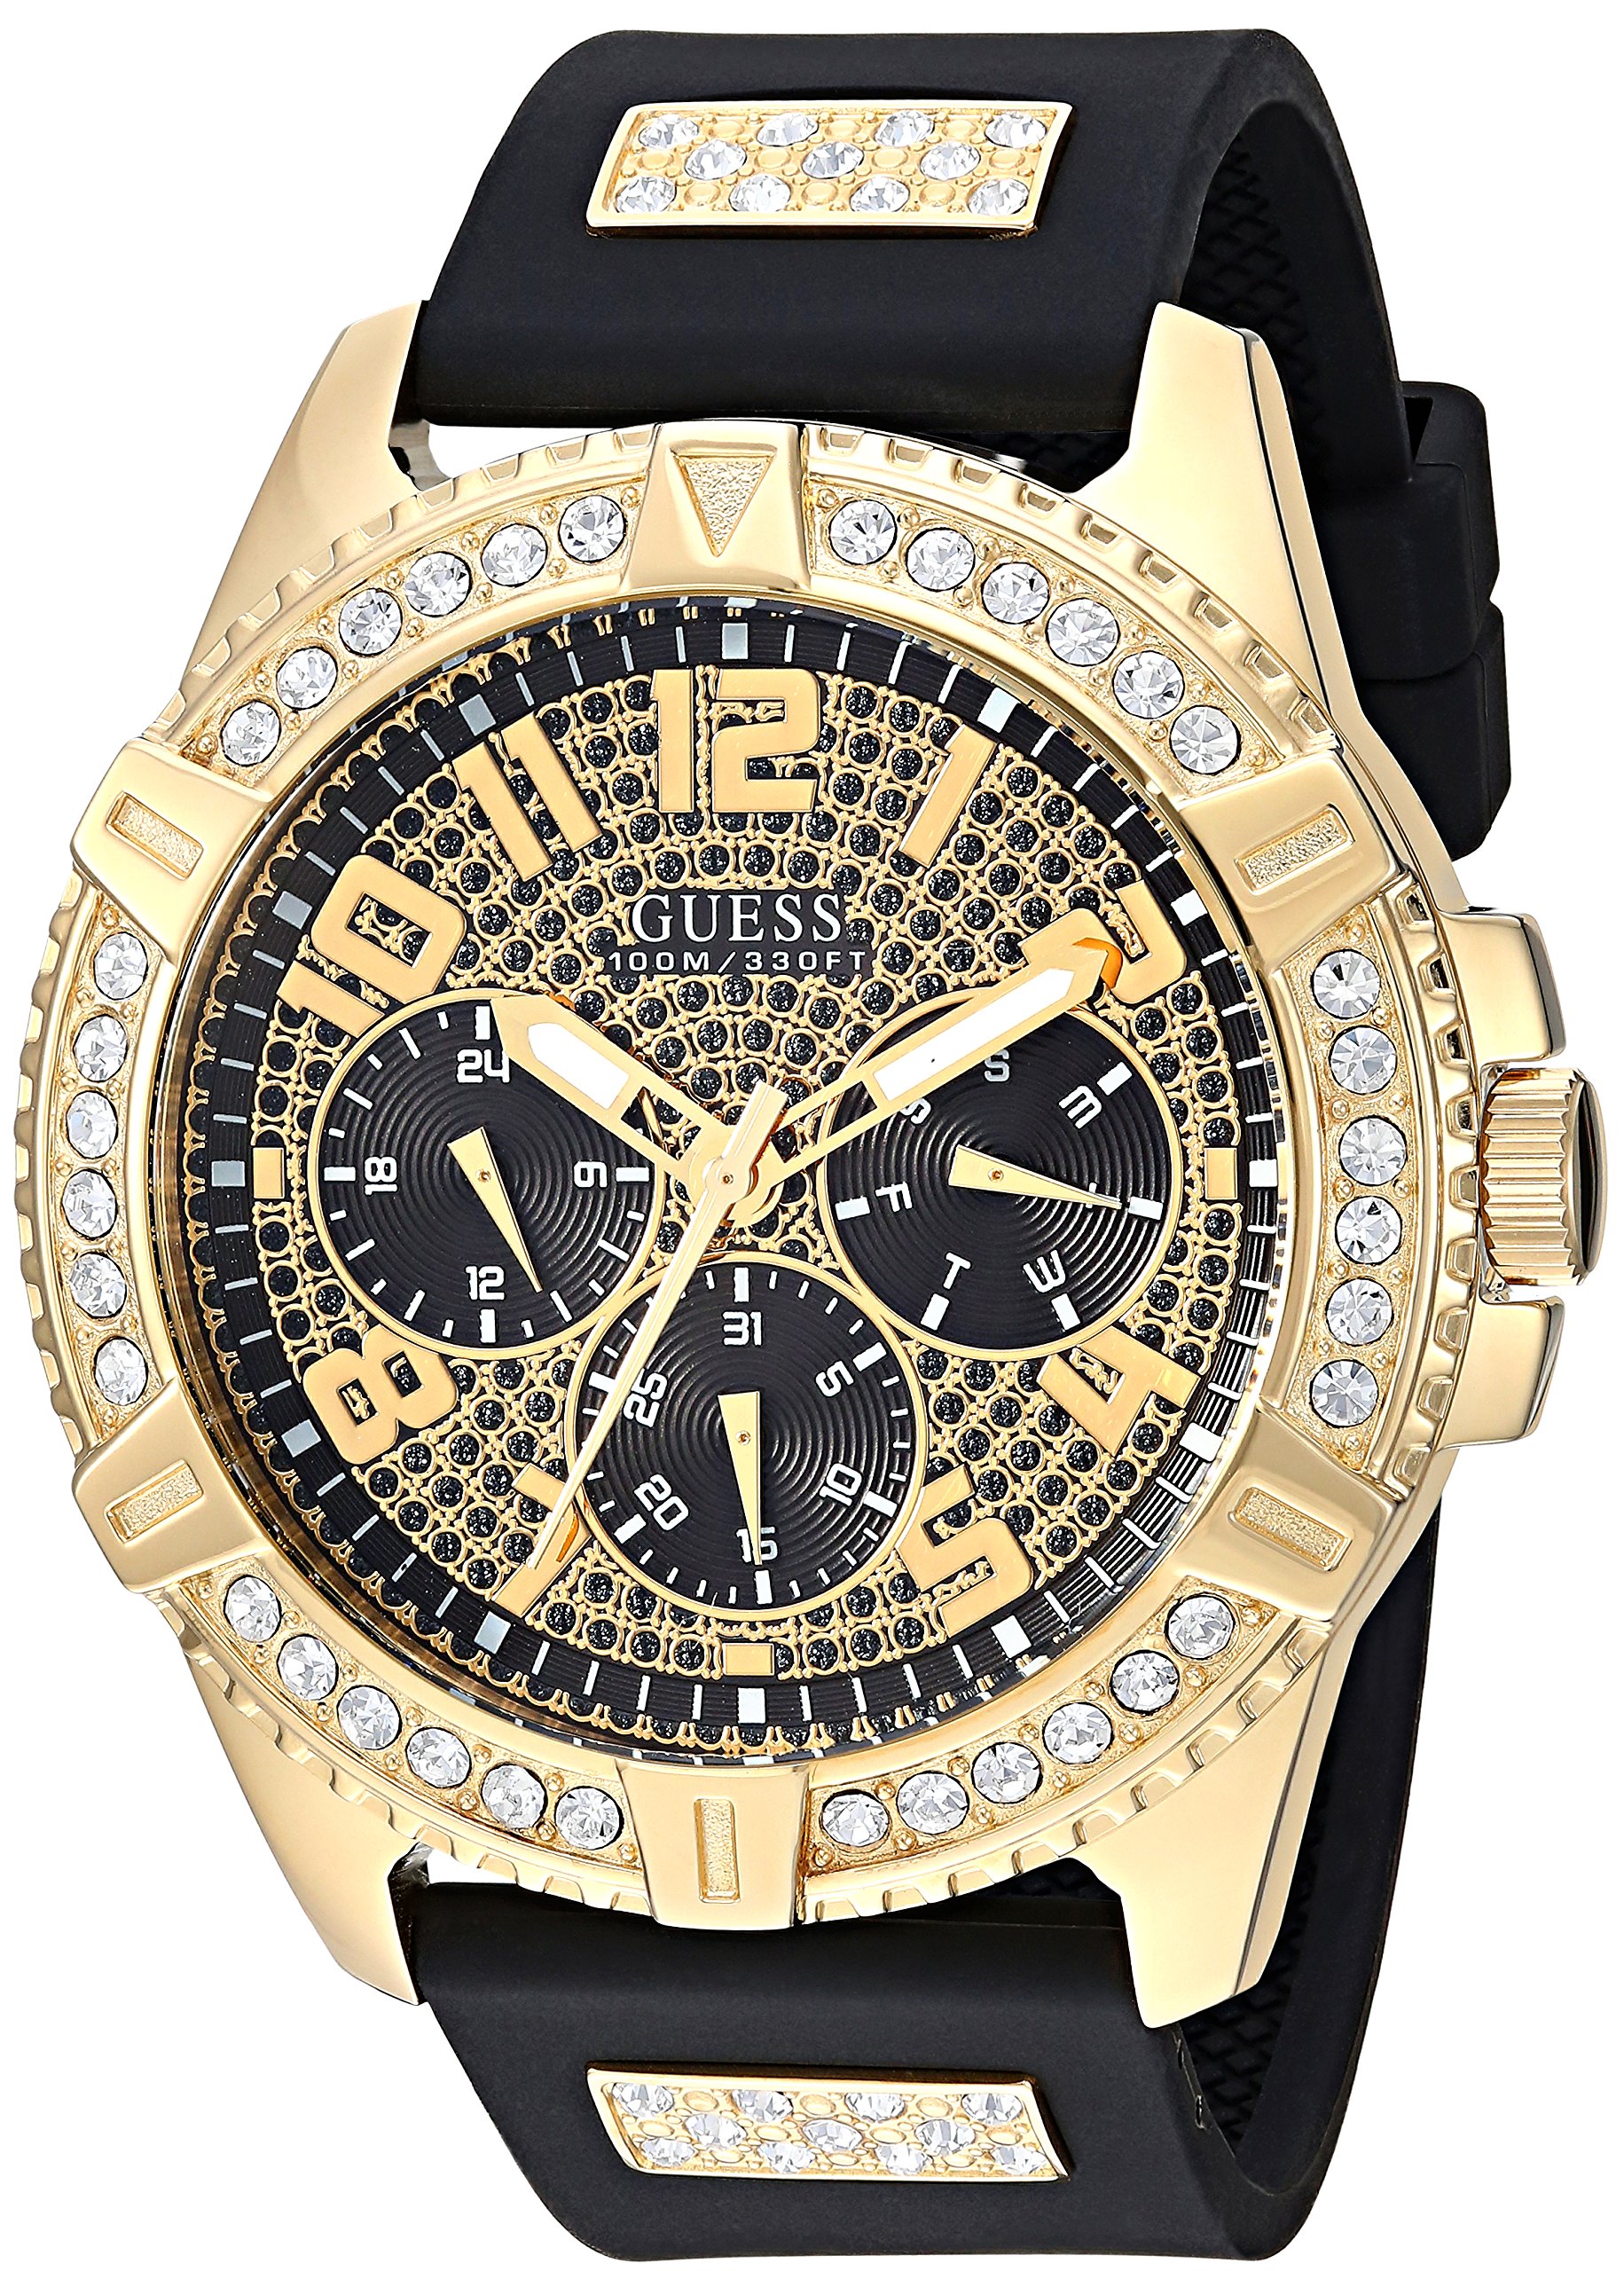 GUESS Stainless Steel Crystal Embellished Bracelet Watch with Day, Date + 24 Hour Military/Int'l Time